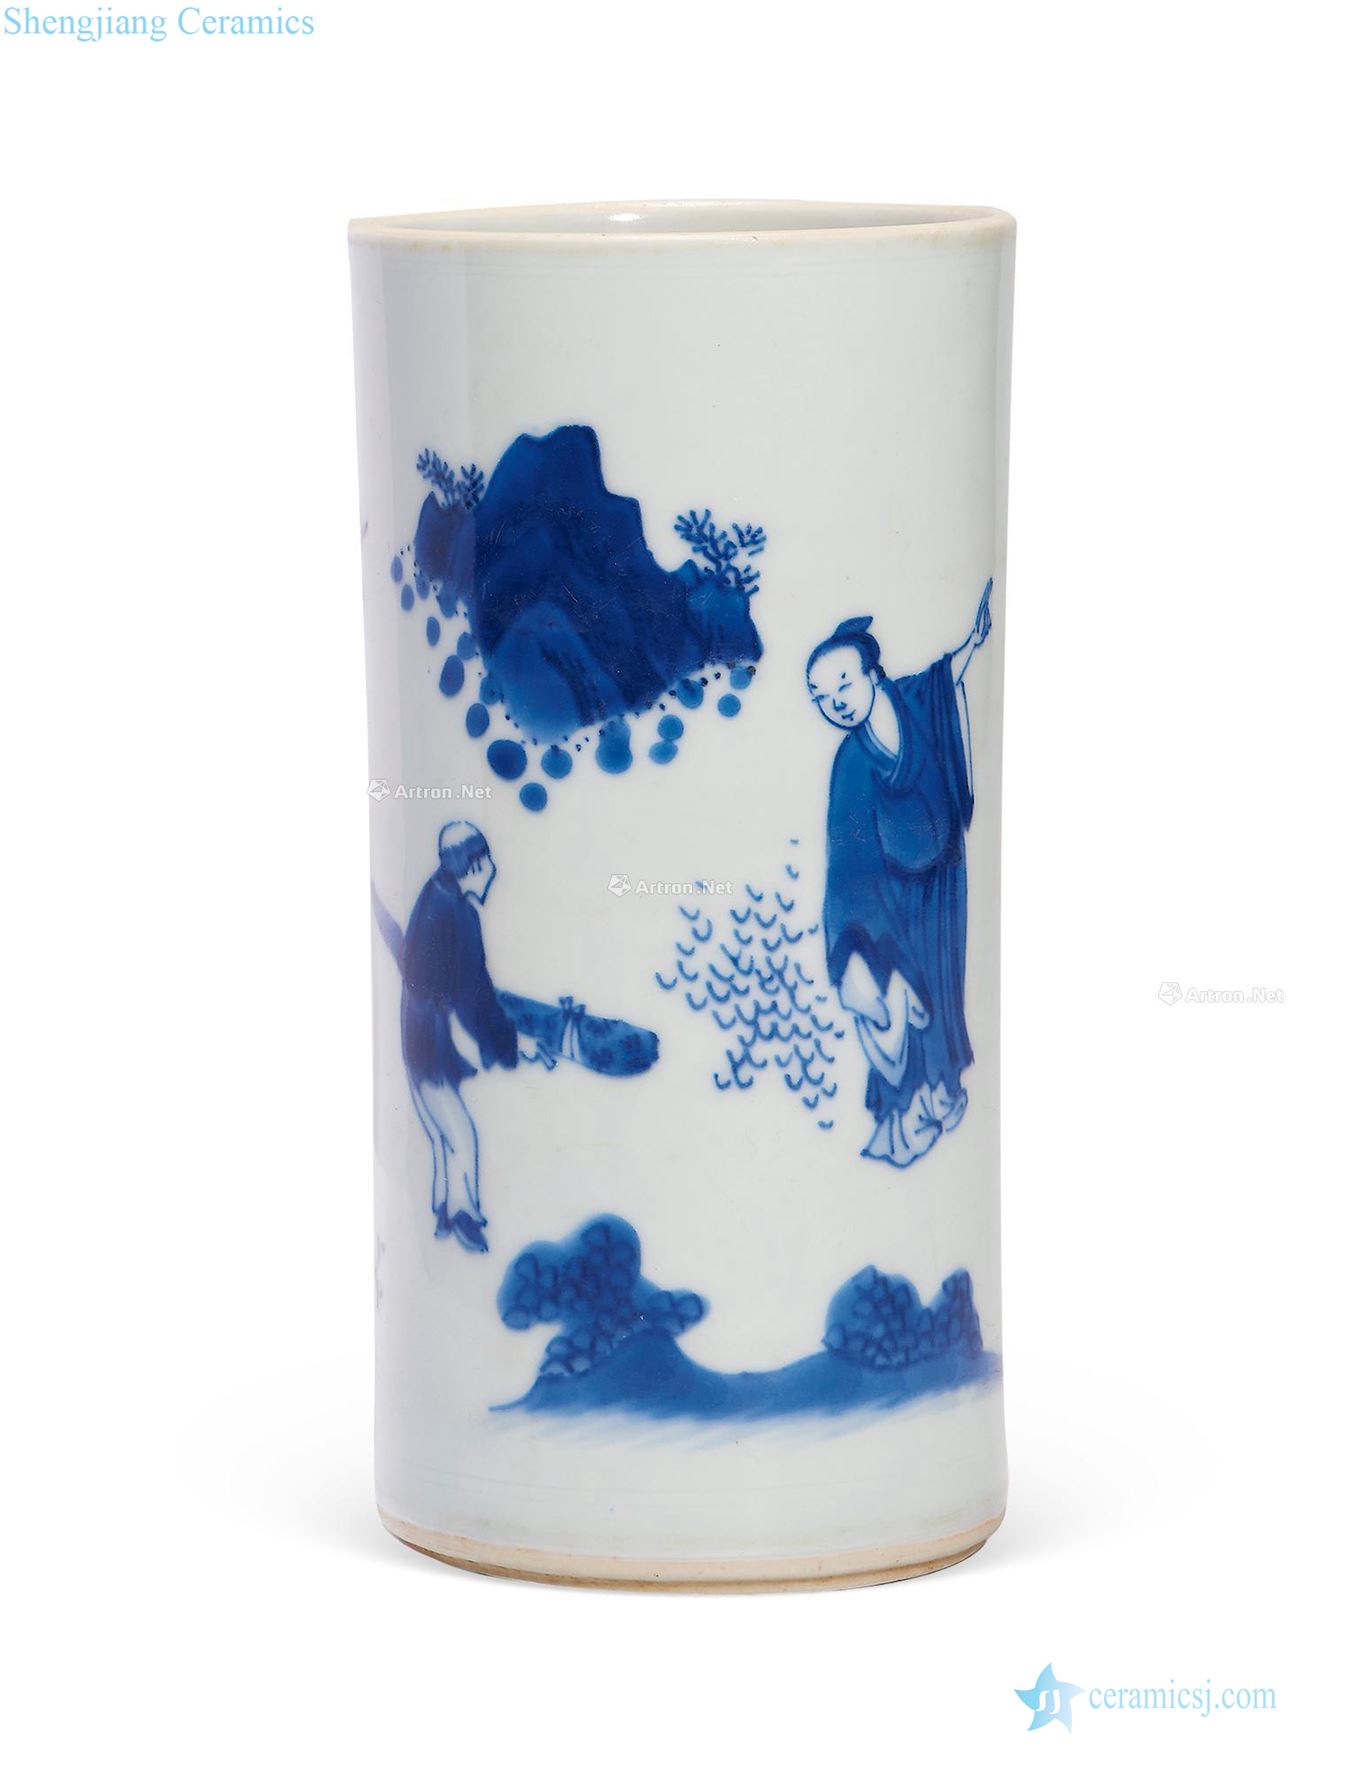 The late Ming dynasty Blue and white "up to" brush pot